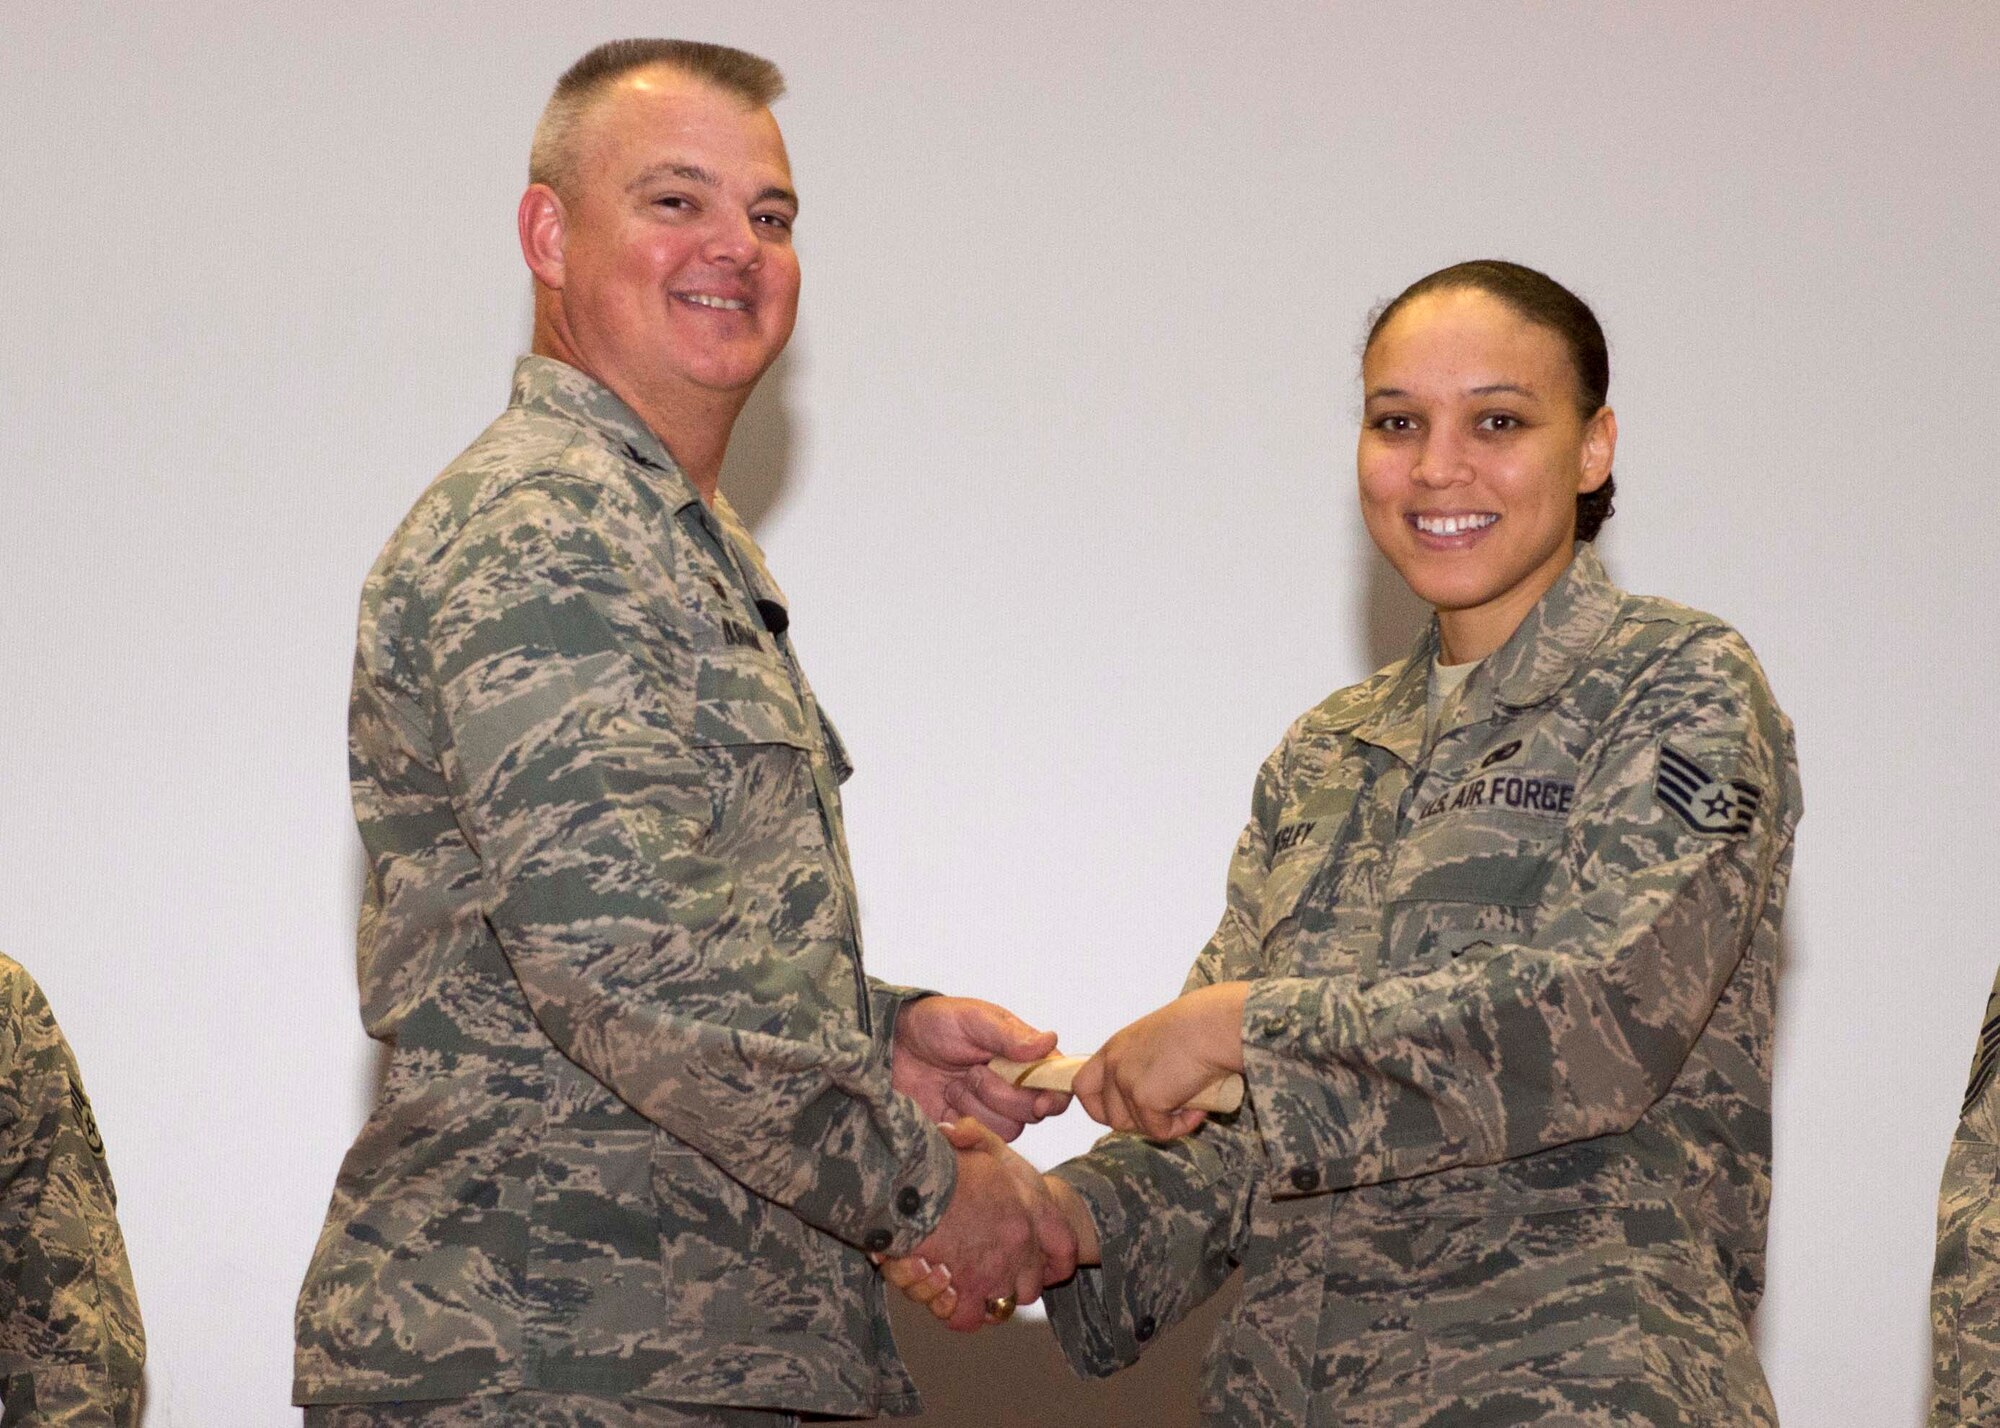 Staff Sgt. Savanna Wesley, 512th Security Forces Squadron, shakes hands with Col. Scott D. Durham, 512th AW commander, during the wing's Community College of the Air Force graduation ceremony, Dec. 3, 2016, Dover Air Force Base, Del. The wing surpassed their goal of awarding 100 CCAF degrees during 2016 and awarded 109 degrees. (U.S. Air Force Photo/Staff Sgt. Renee Jackson)